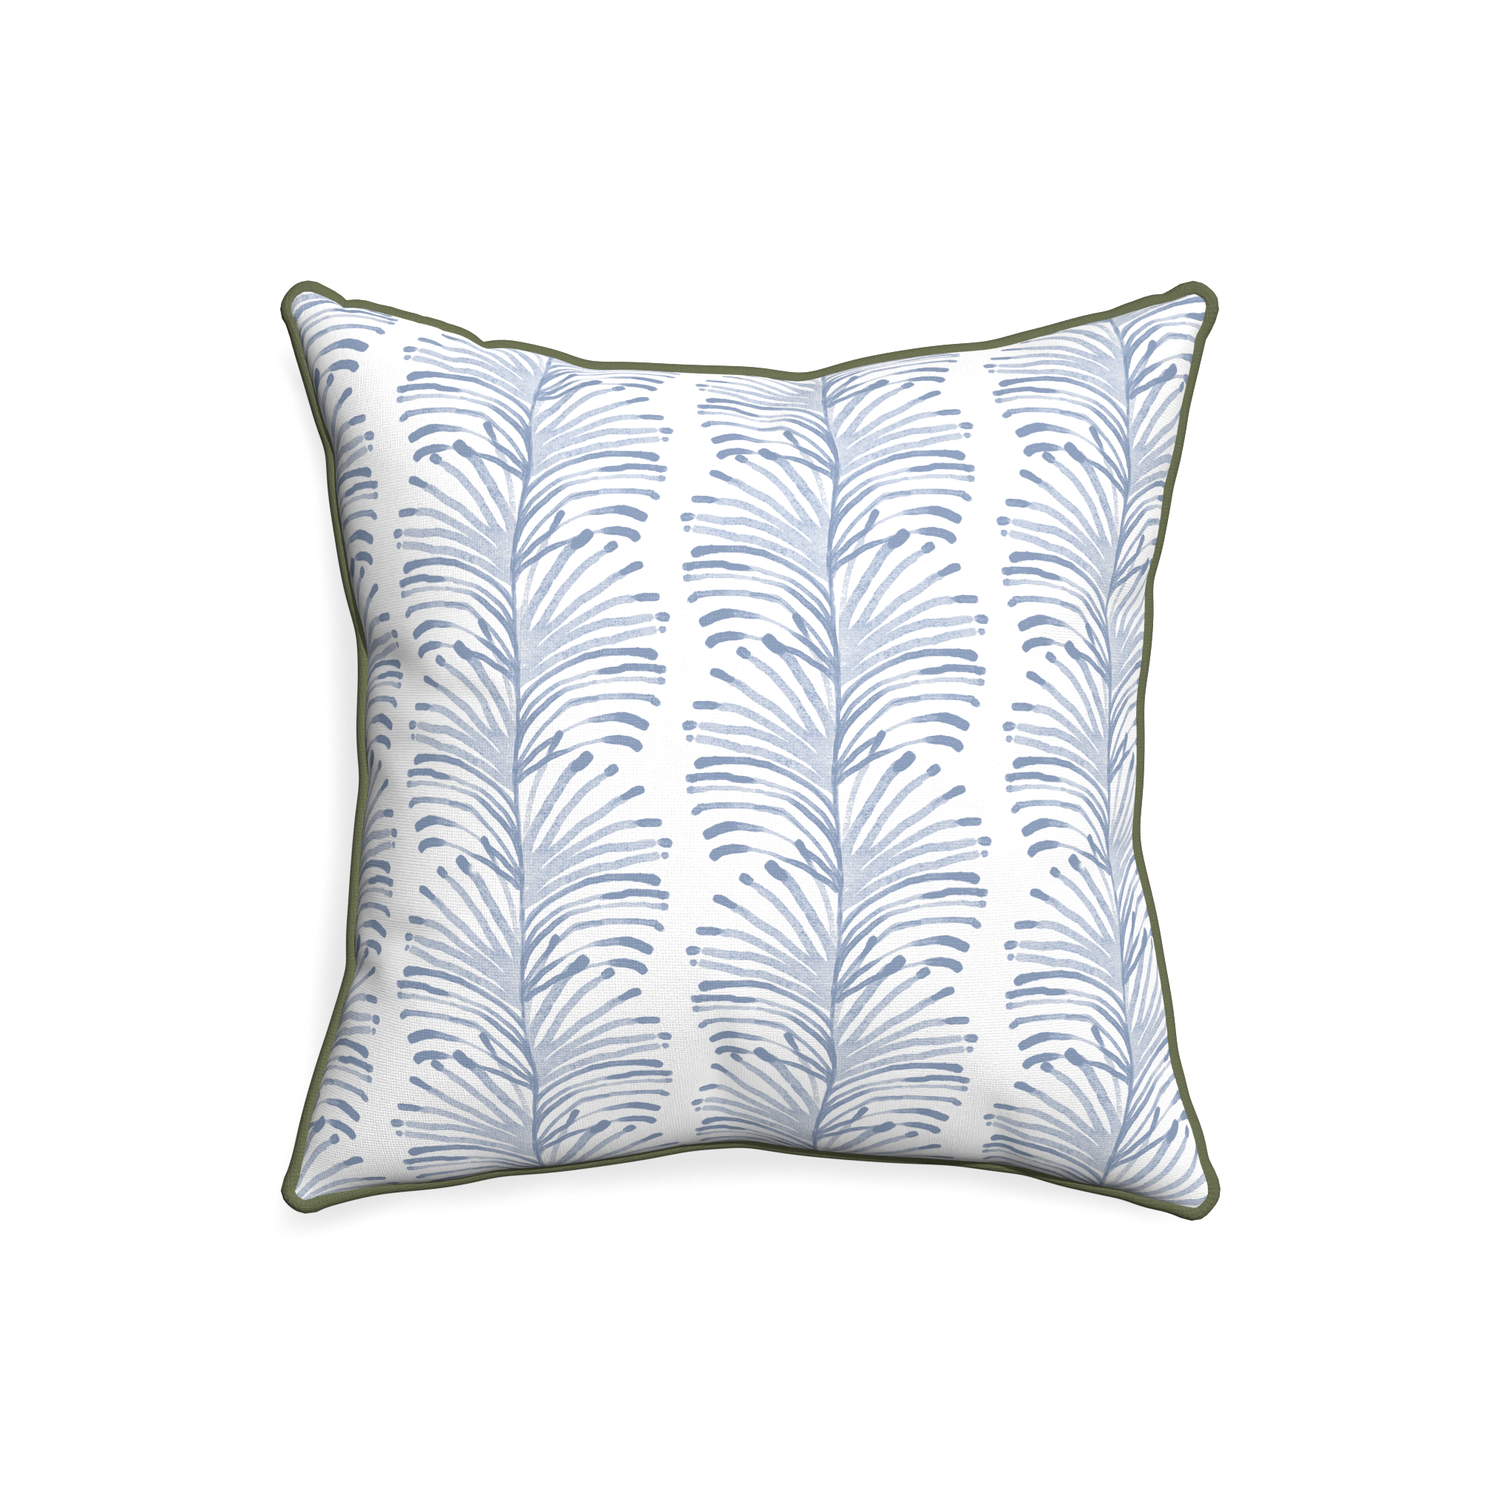 20-square emma sky custom pillow with f piping on white background